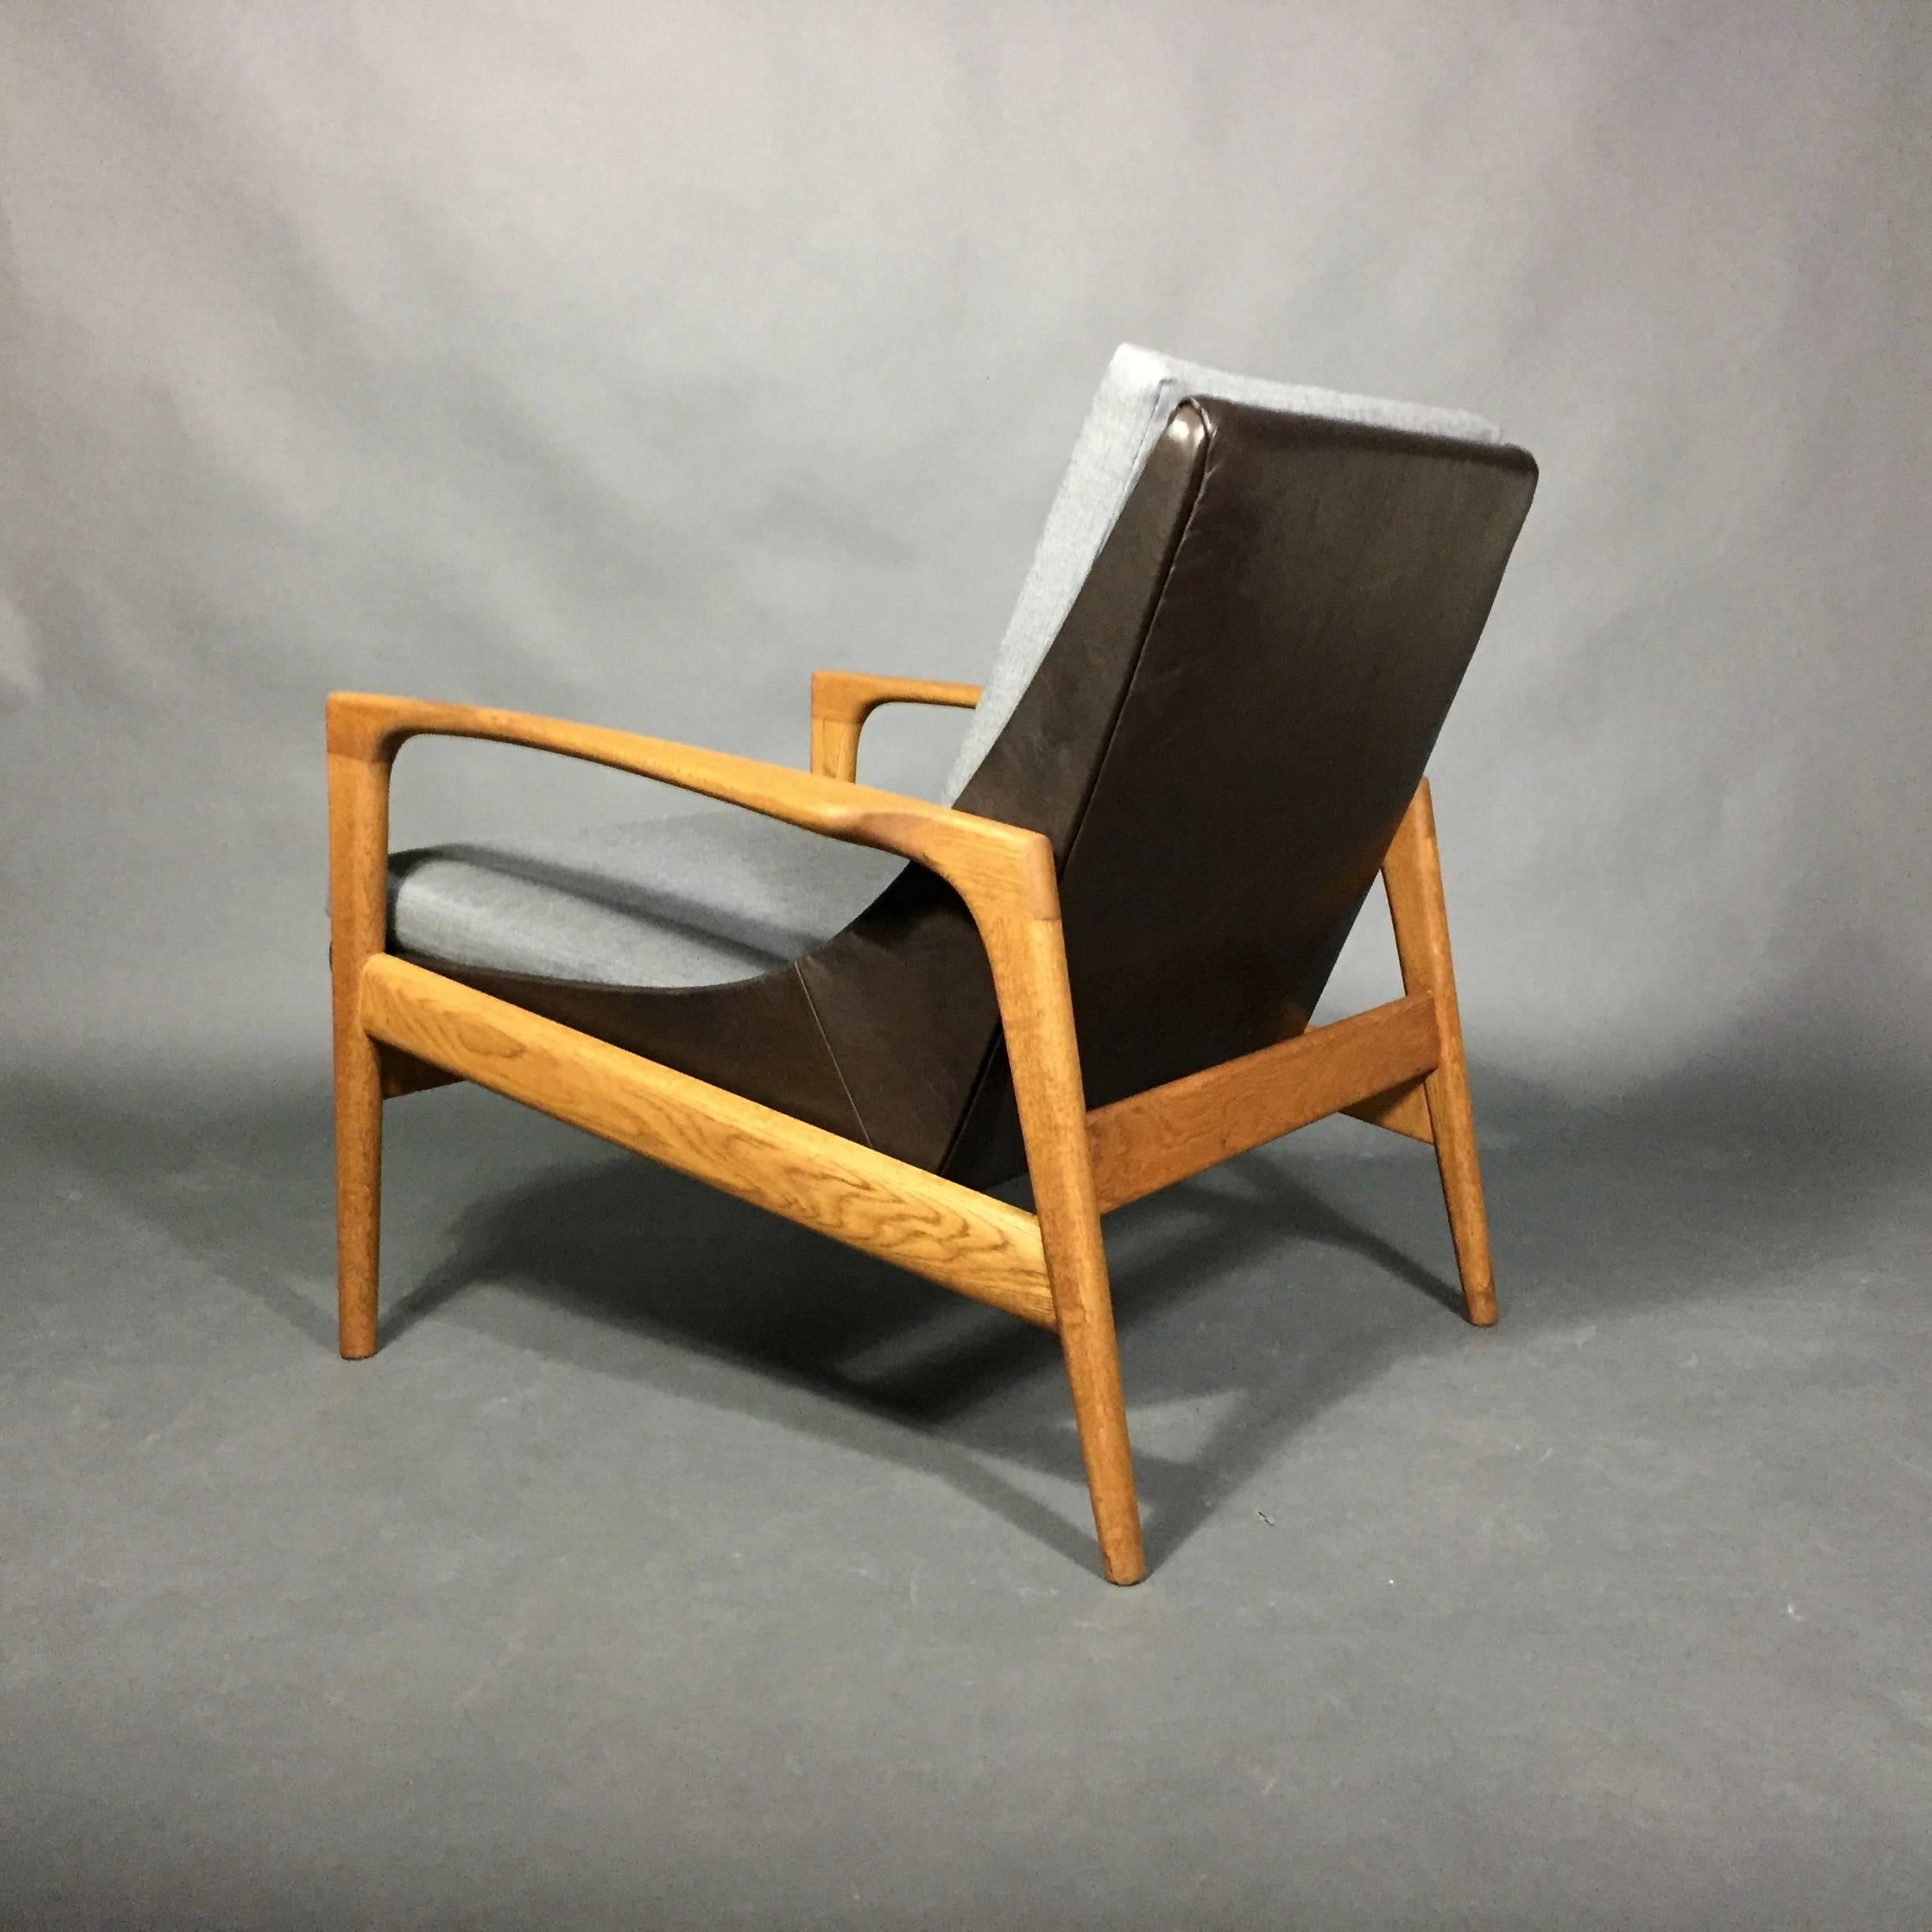 This lounge chair was manufactured by AB Trensums Fåtöljfabrik in Sweden in the 1950s and retains its original Trensums metal tag. It is unclear if designed by Ib Kofod-Larsen who was very prolific in Scandinavian design across a wide range of